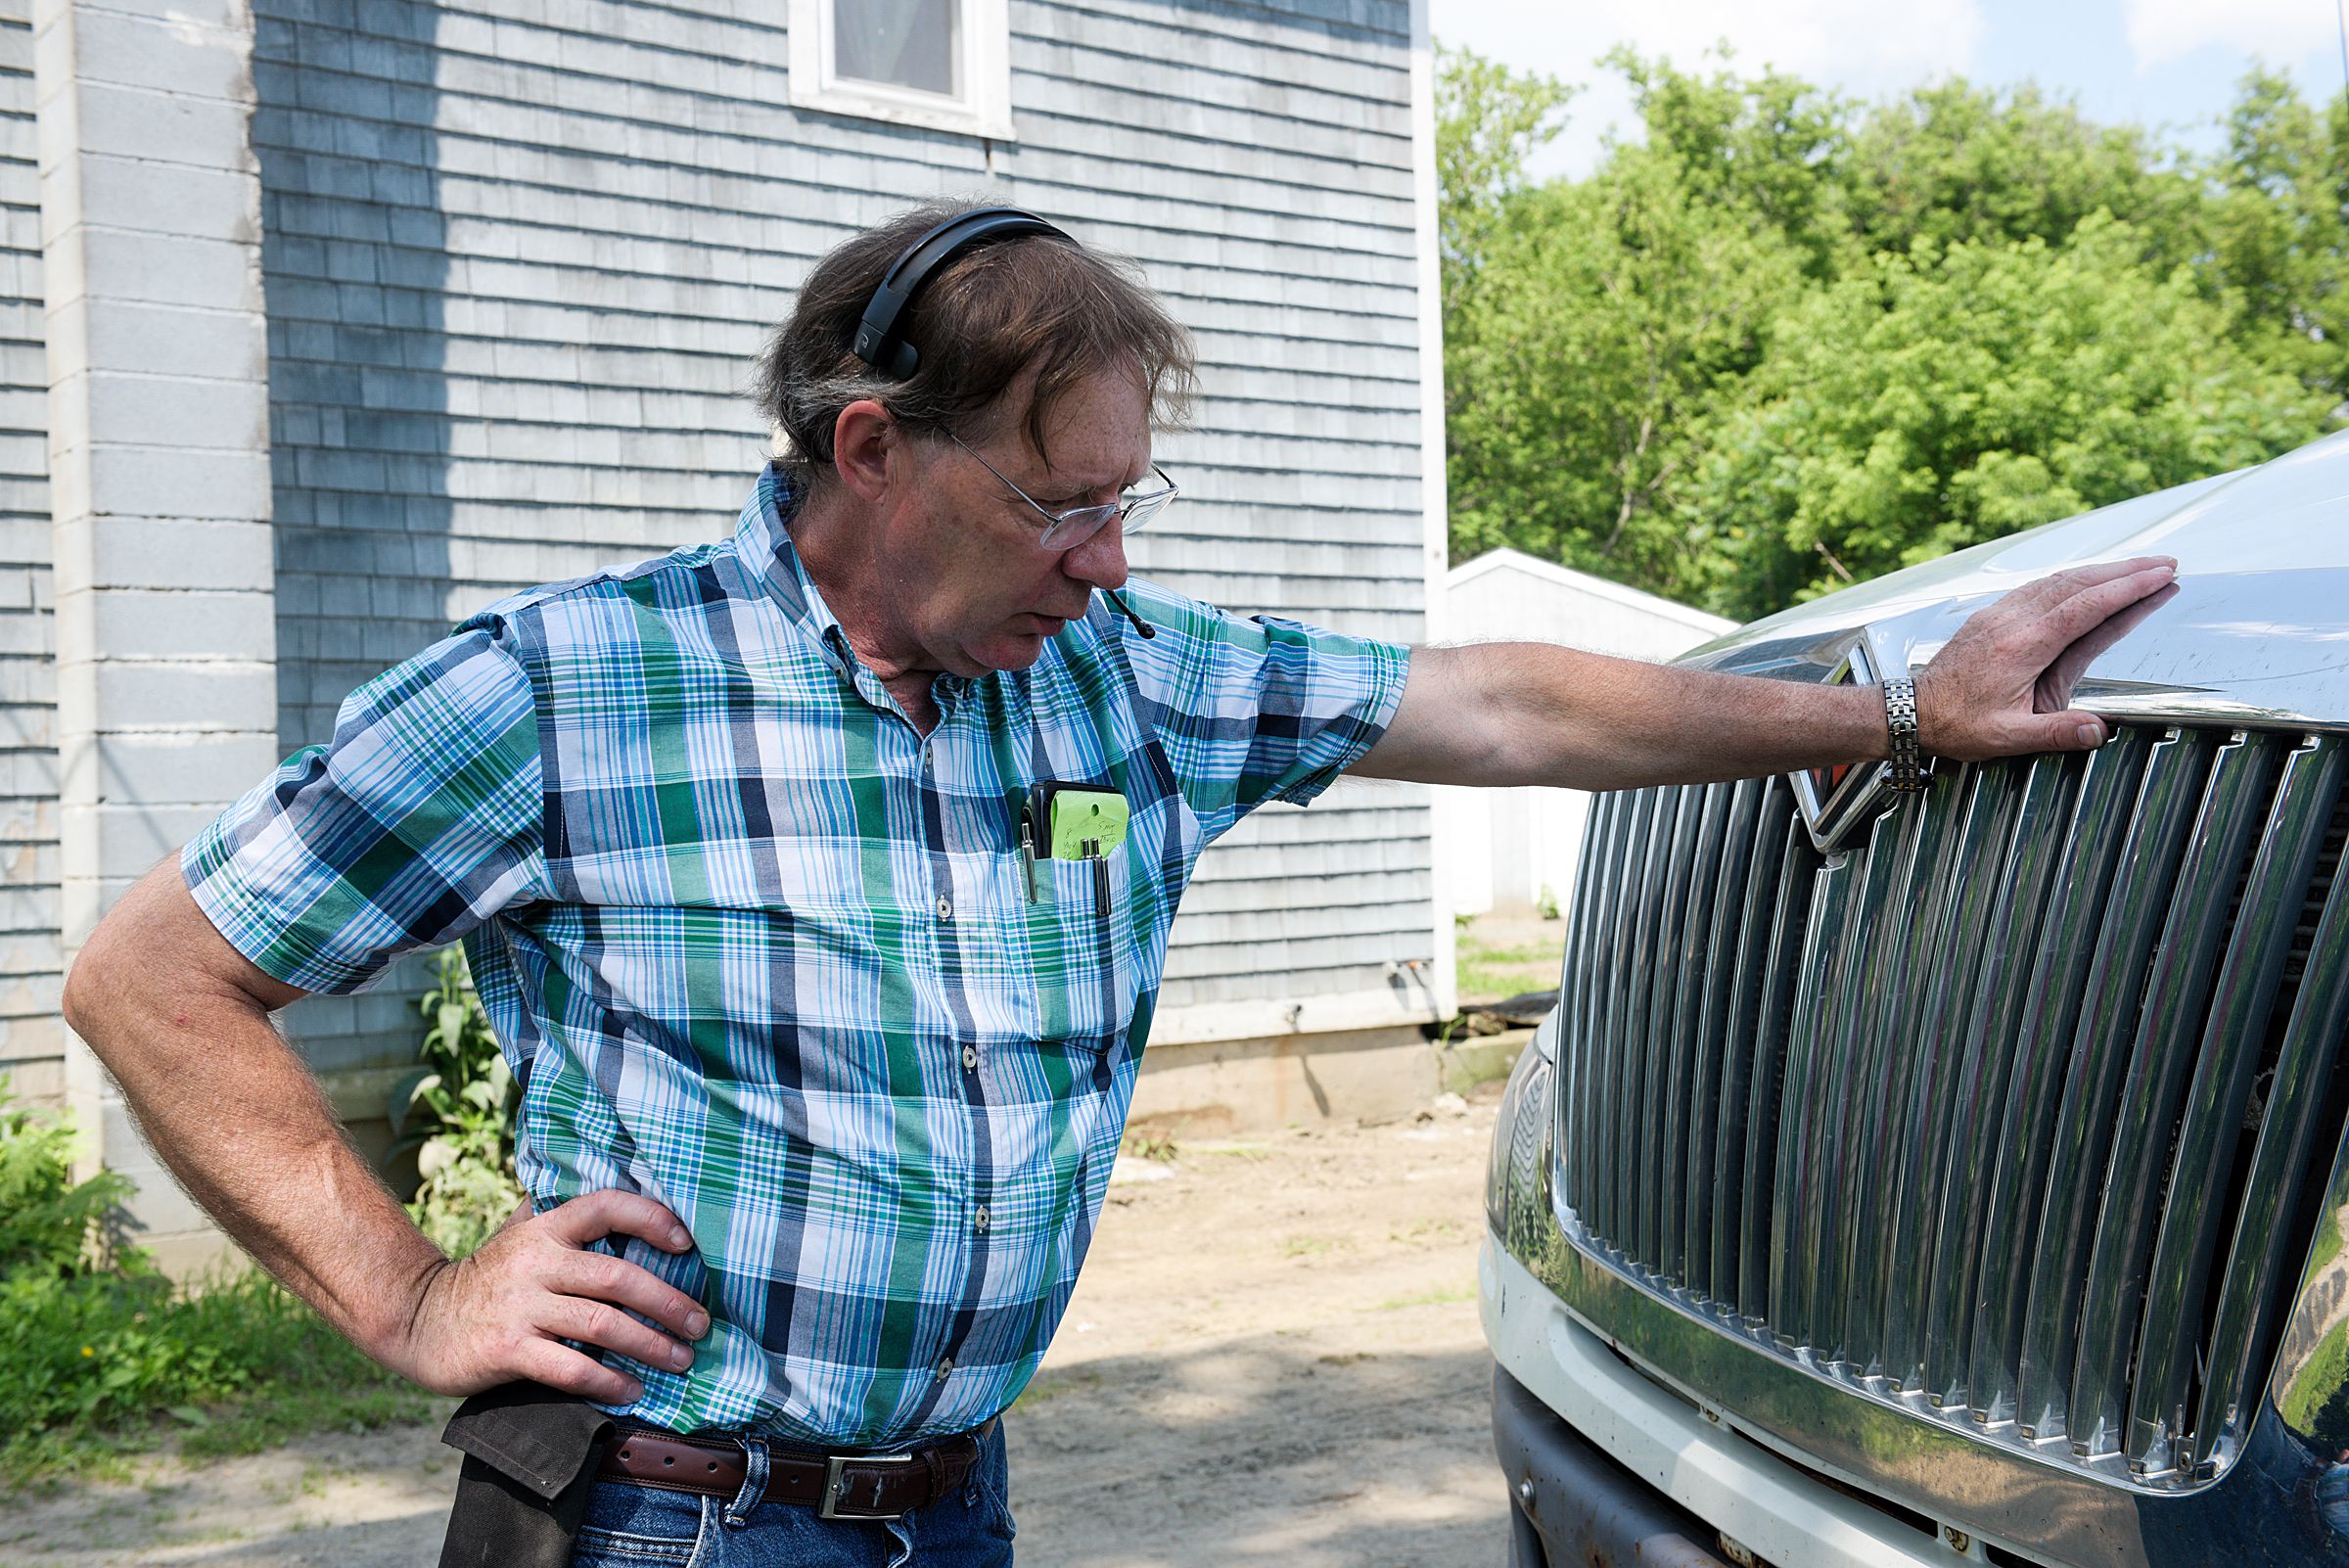 IBA dealer John Kerr, of Brandon, Vt., takes a phone call during a stop at Perley Farm in Royalton, Vt., Wednesday, July 3, 2019. Kerr has three brothers that are also IBA dealers. (Valley News - James M. Patterson) Copyright Valley News. May not be reprinted or used online without permission. Send requests to permission@vnews.com.